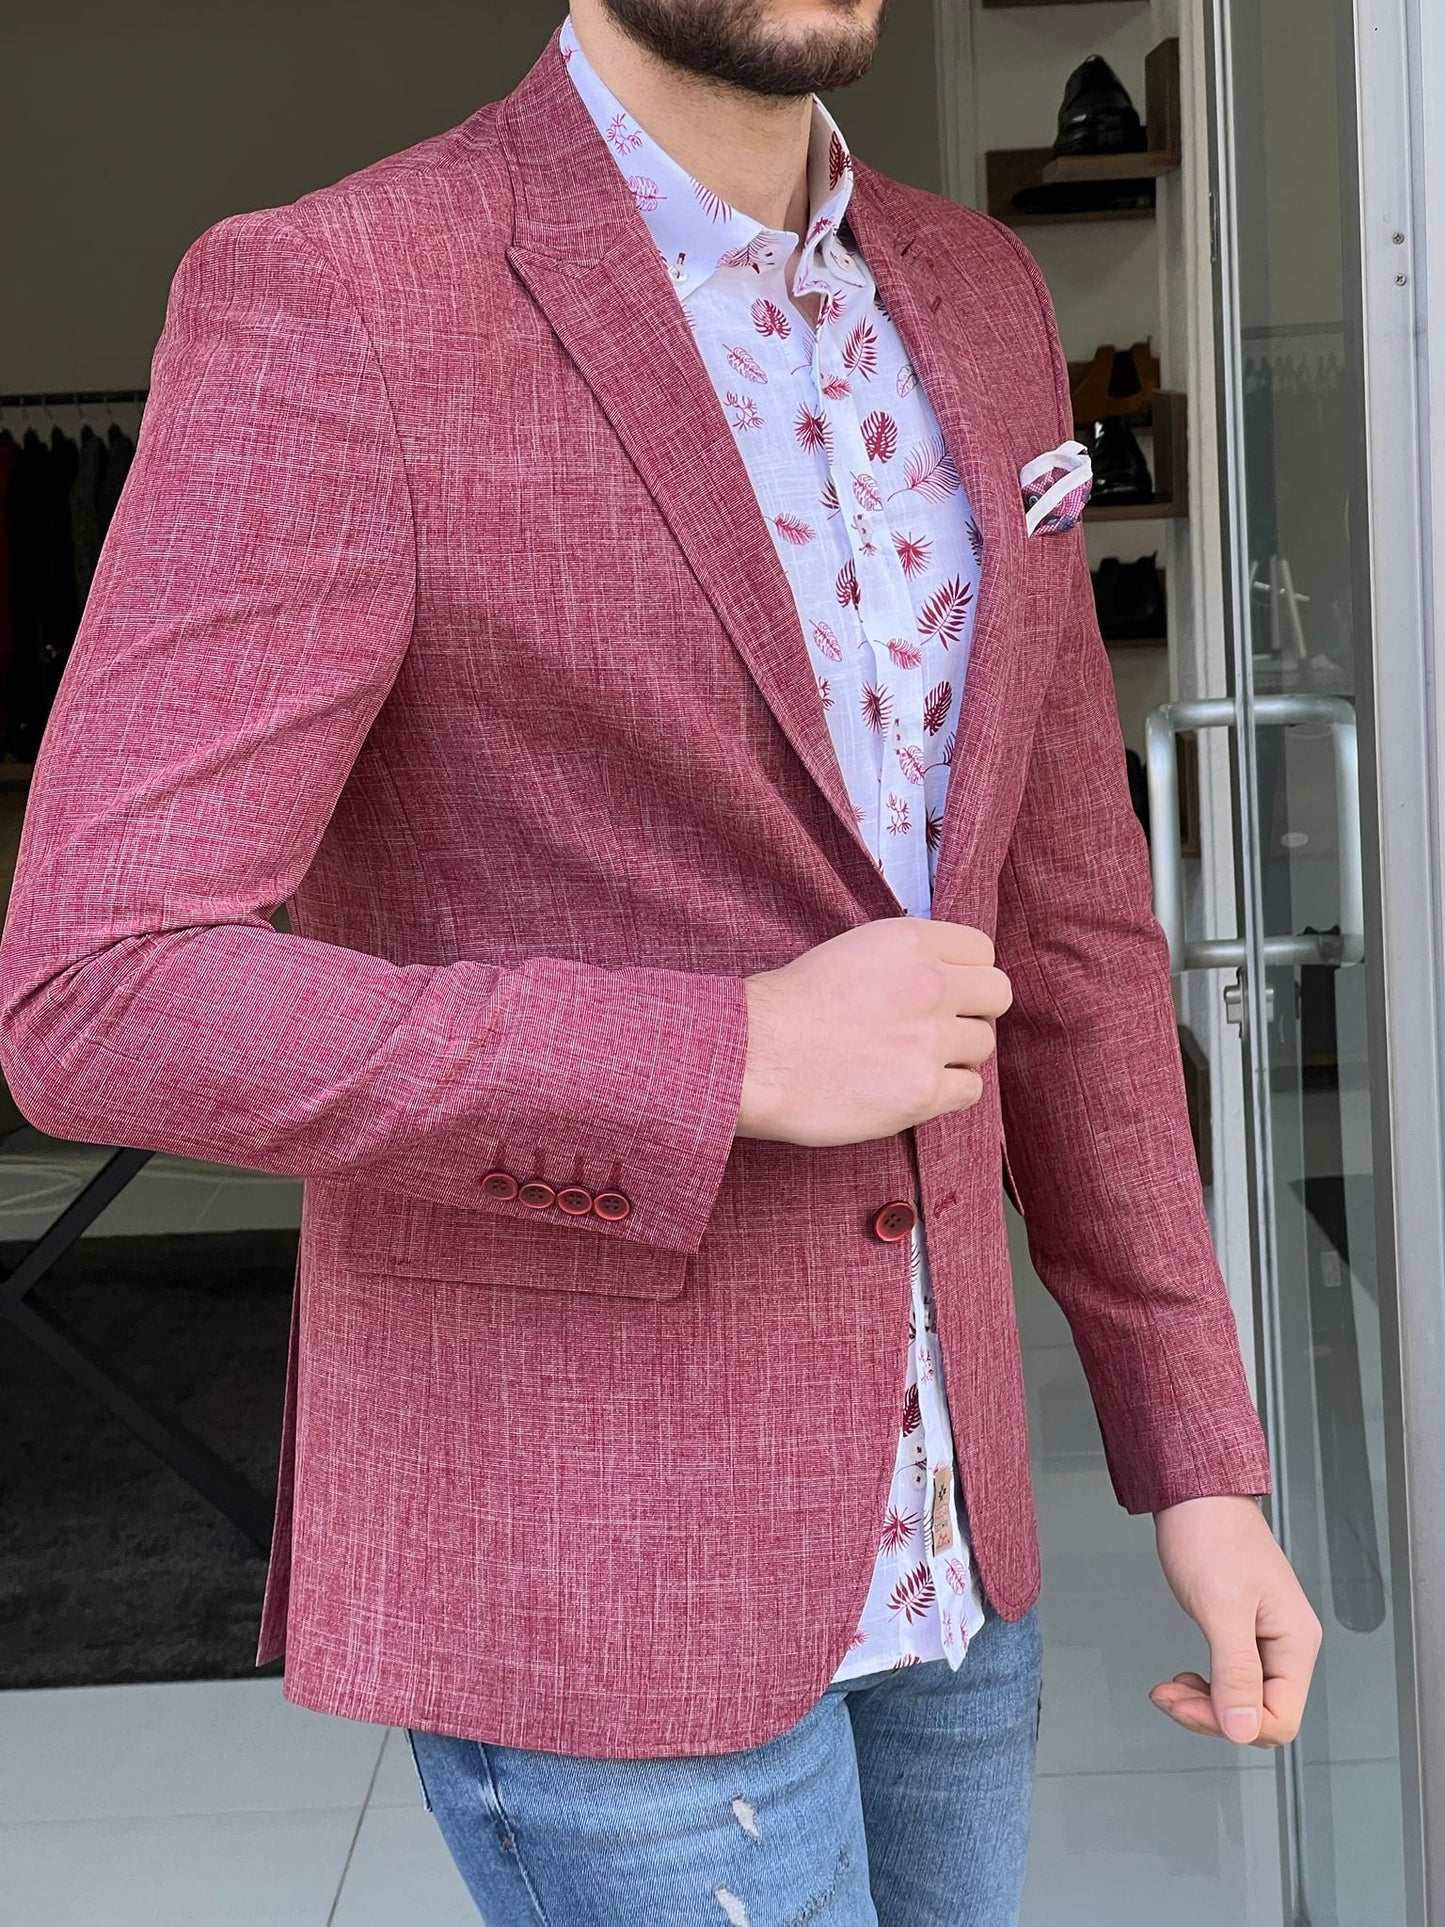 Slim Fit Self-Patterned Red Cotton Jacket - OUTFITLIFT